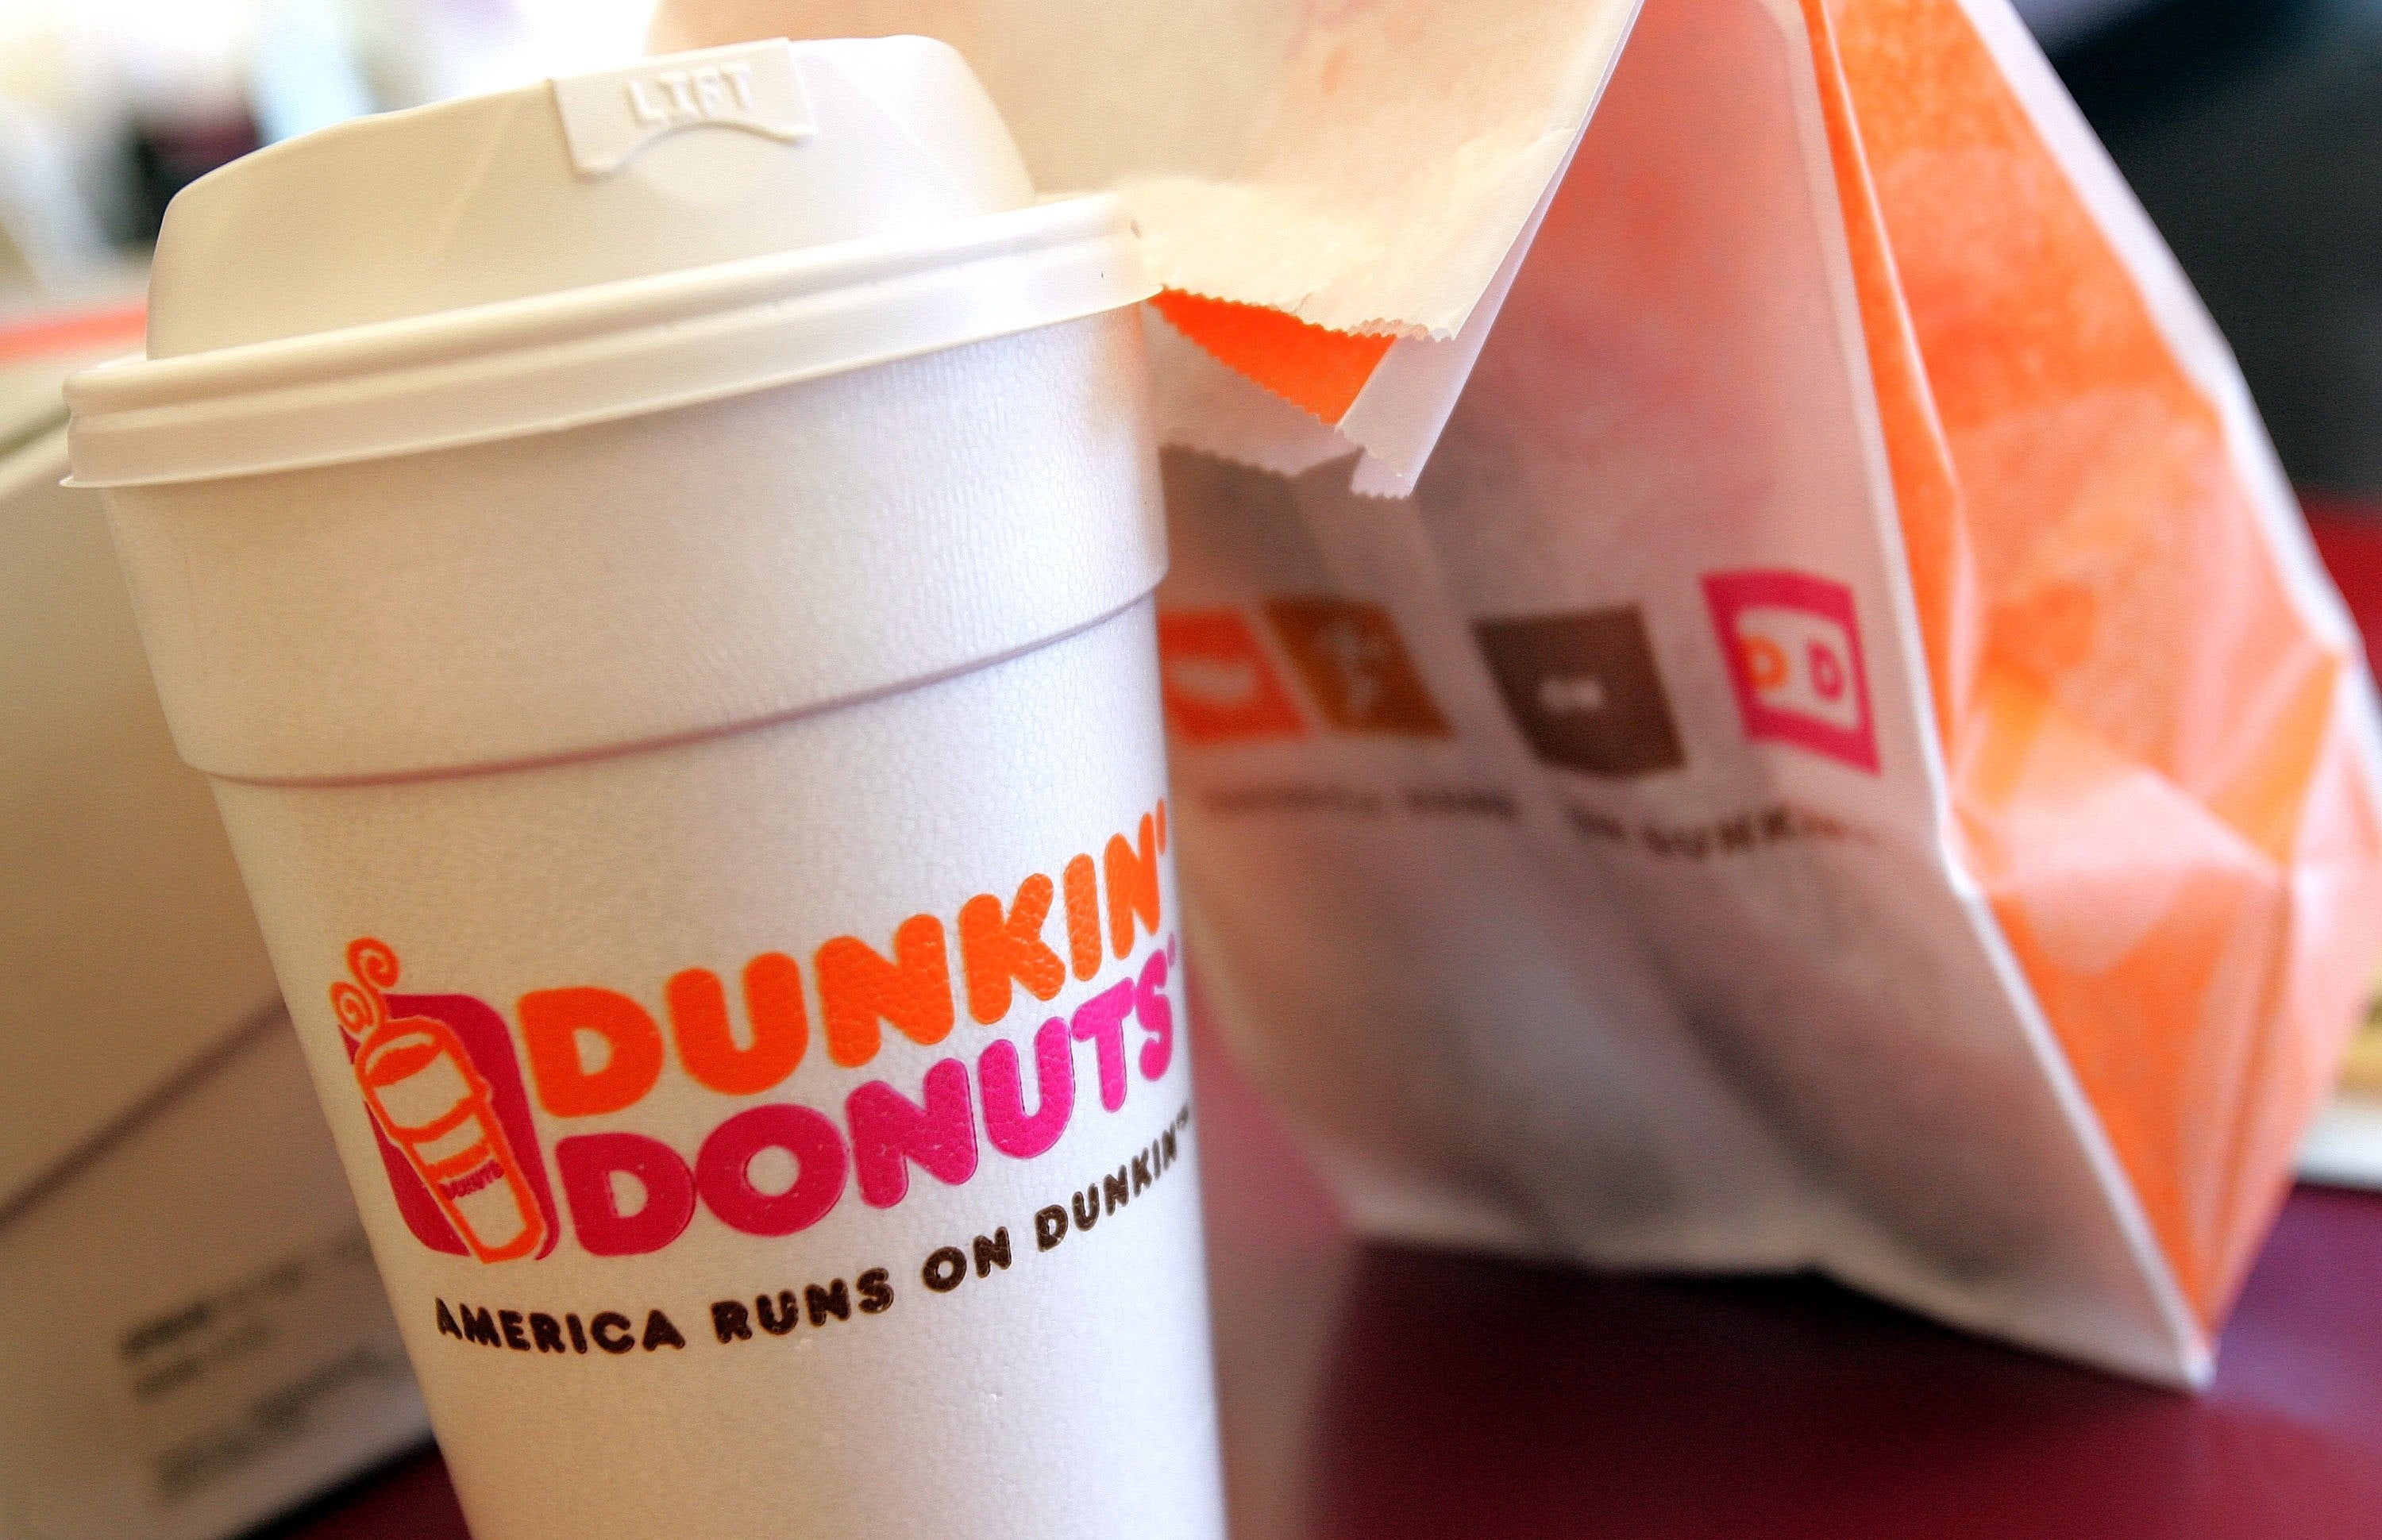 10 plaintiffs are suing Dunkin’ over charges of non-dairy alternatives in drinks